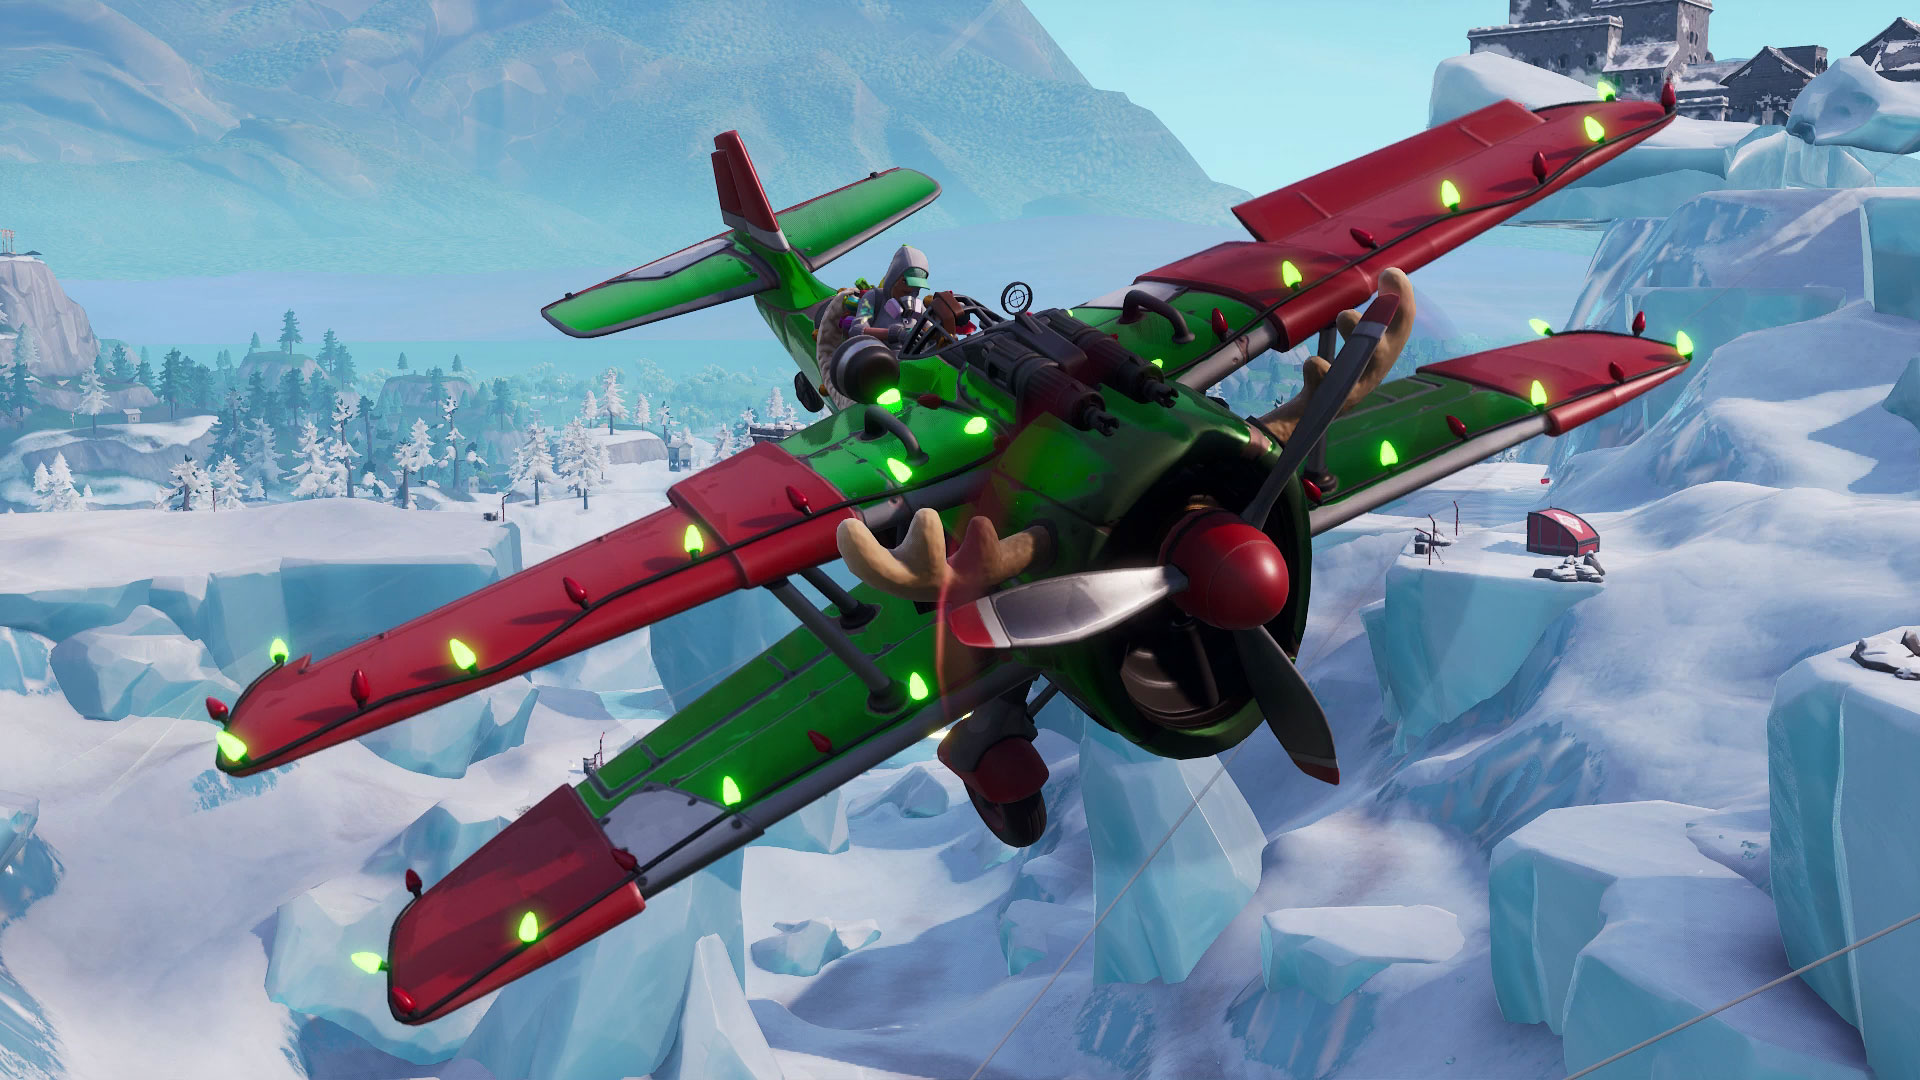 Airplane Sites Fortnite Where To Find A Fortnite Plane And Take To The Skies For Aerial Combat Gamesradar